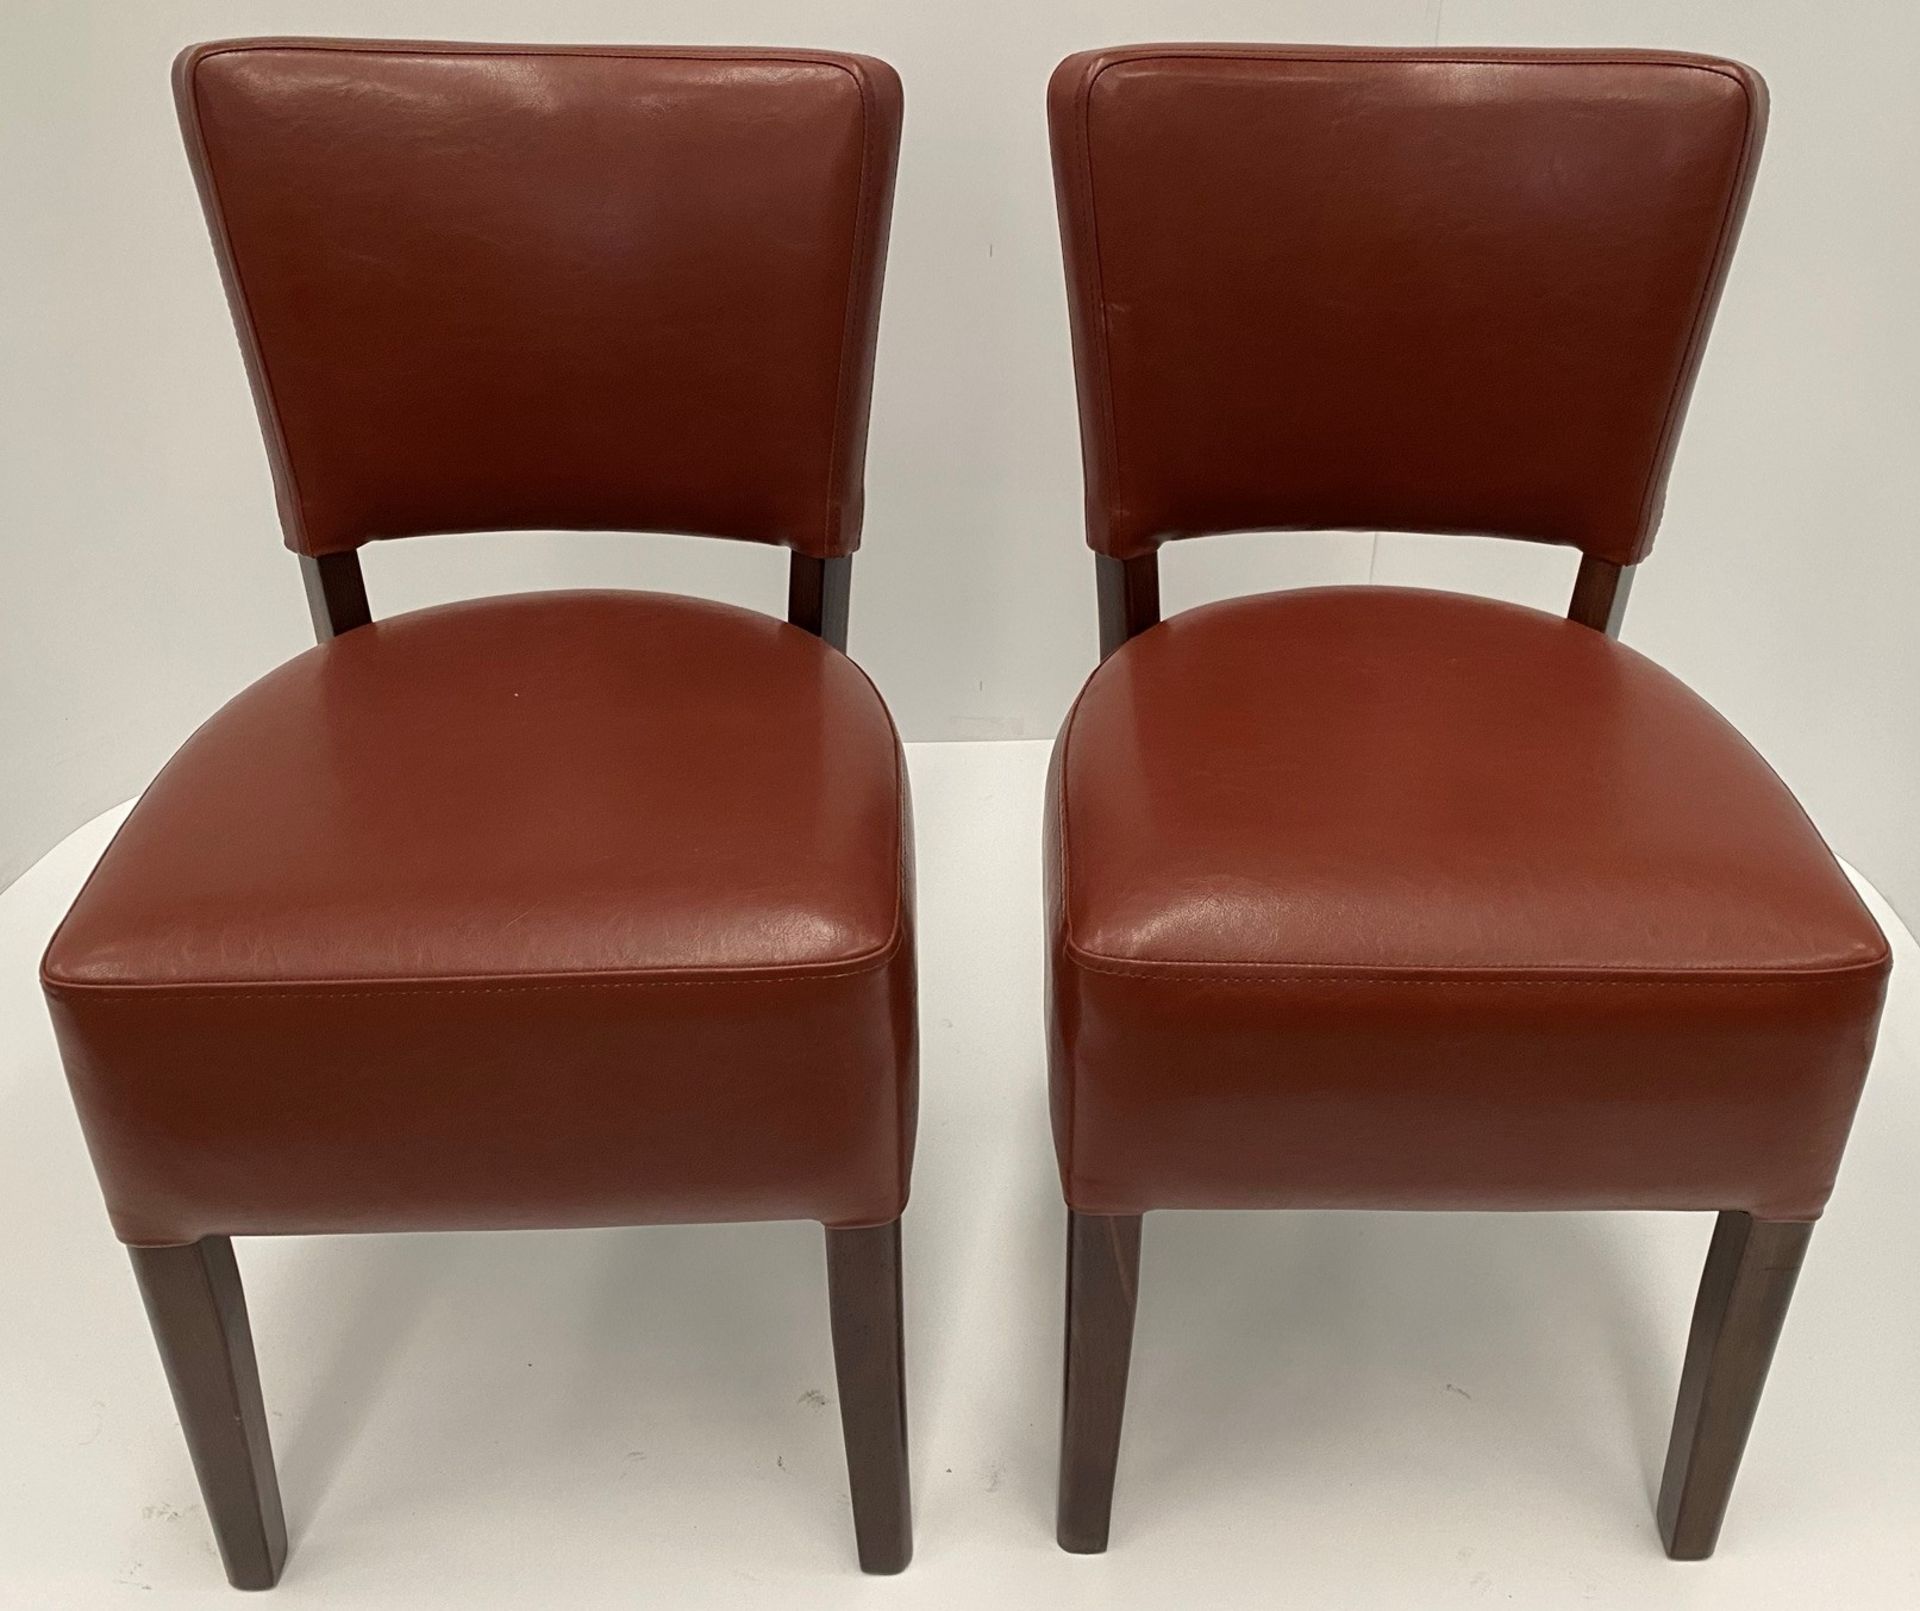 2 x Memphis Margo BR-3 Brown side/dining chairs with walnut coloured frames